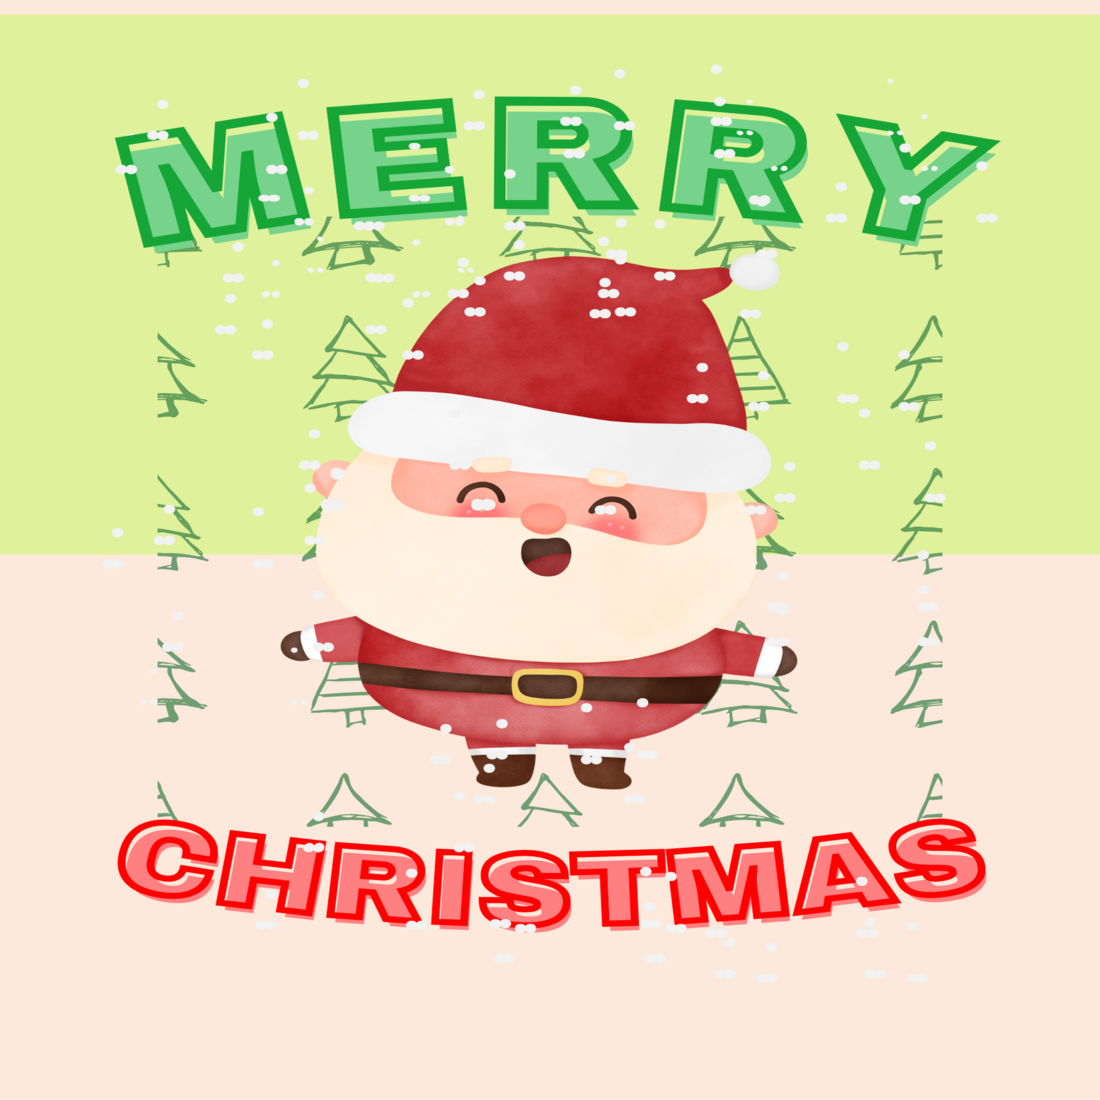 Christmas Santa Claus Templates and Stickers cover image.